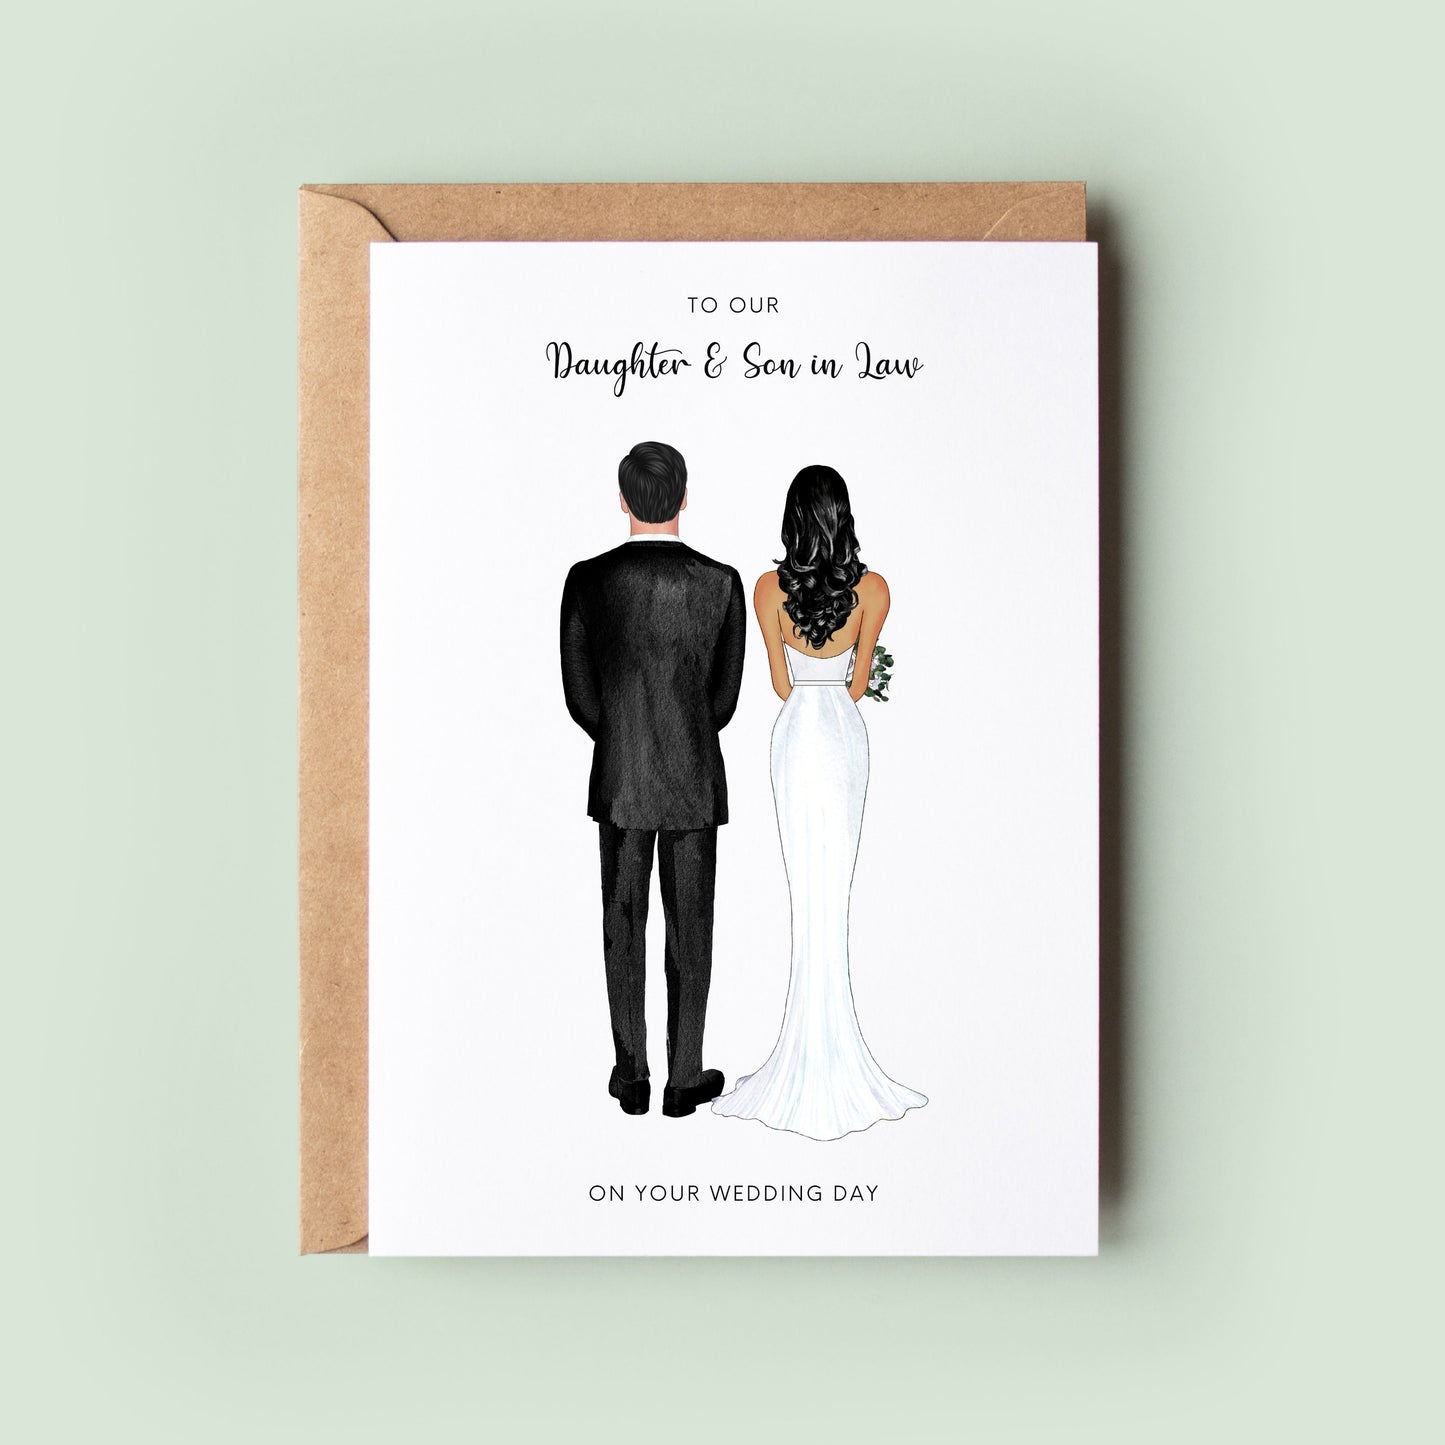 Personalised To Our Daughter & Son In Law On Your Wedding Day Card, Wedding Day Card from Parents, Wedding Keepsake, Newlyweds Wedding Card